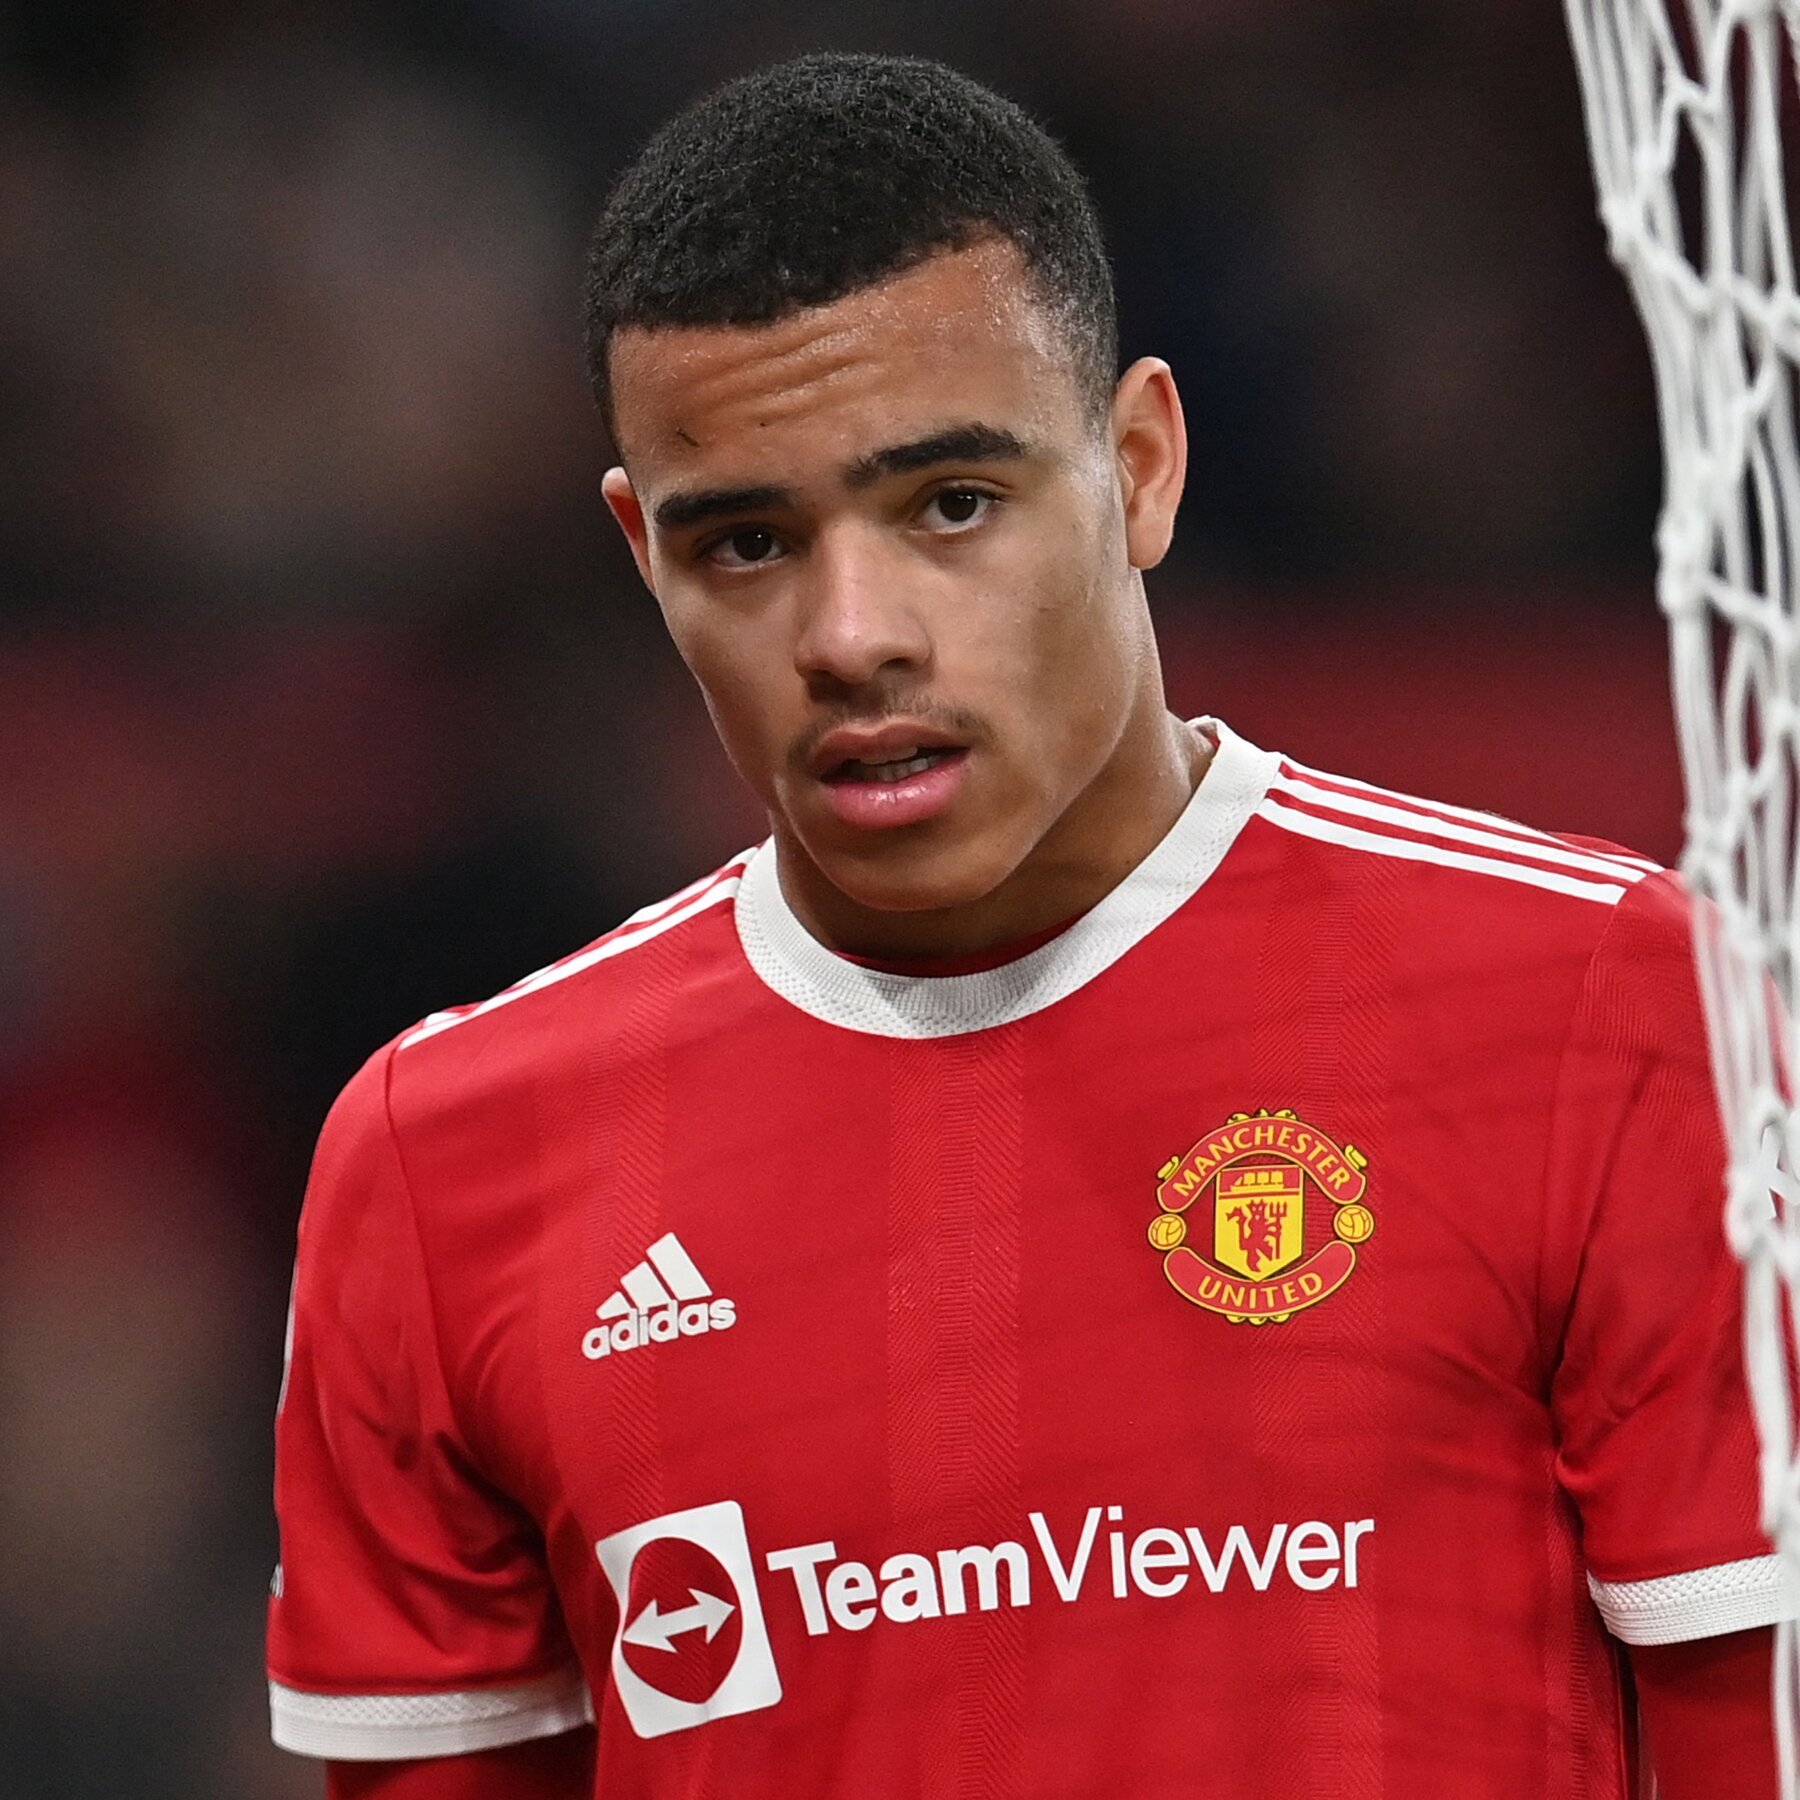 Manchester United Drops Mason Greenwood After Abuse Charge